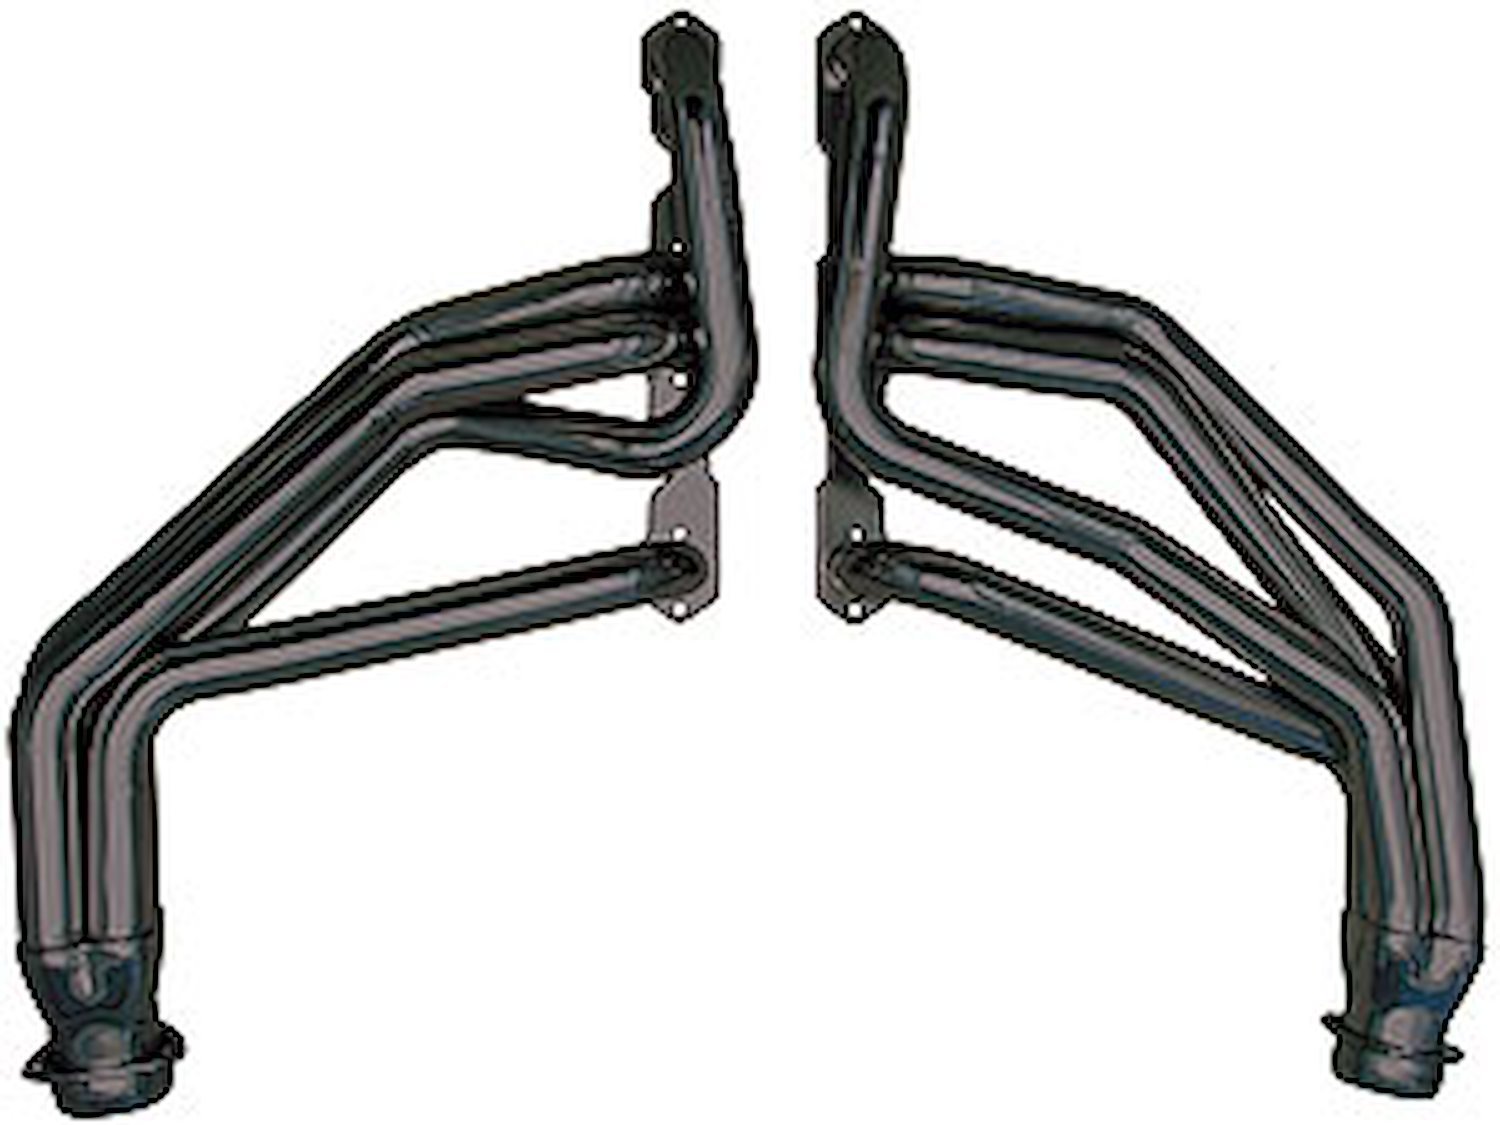 Standard Duty Uncoated Full Length Headers for 1967-91 Chevy/GMC Blazer/Jimmy/Suburban/Pickup 283-400